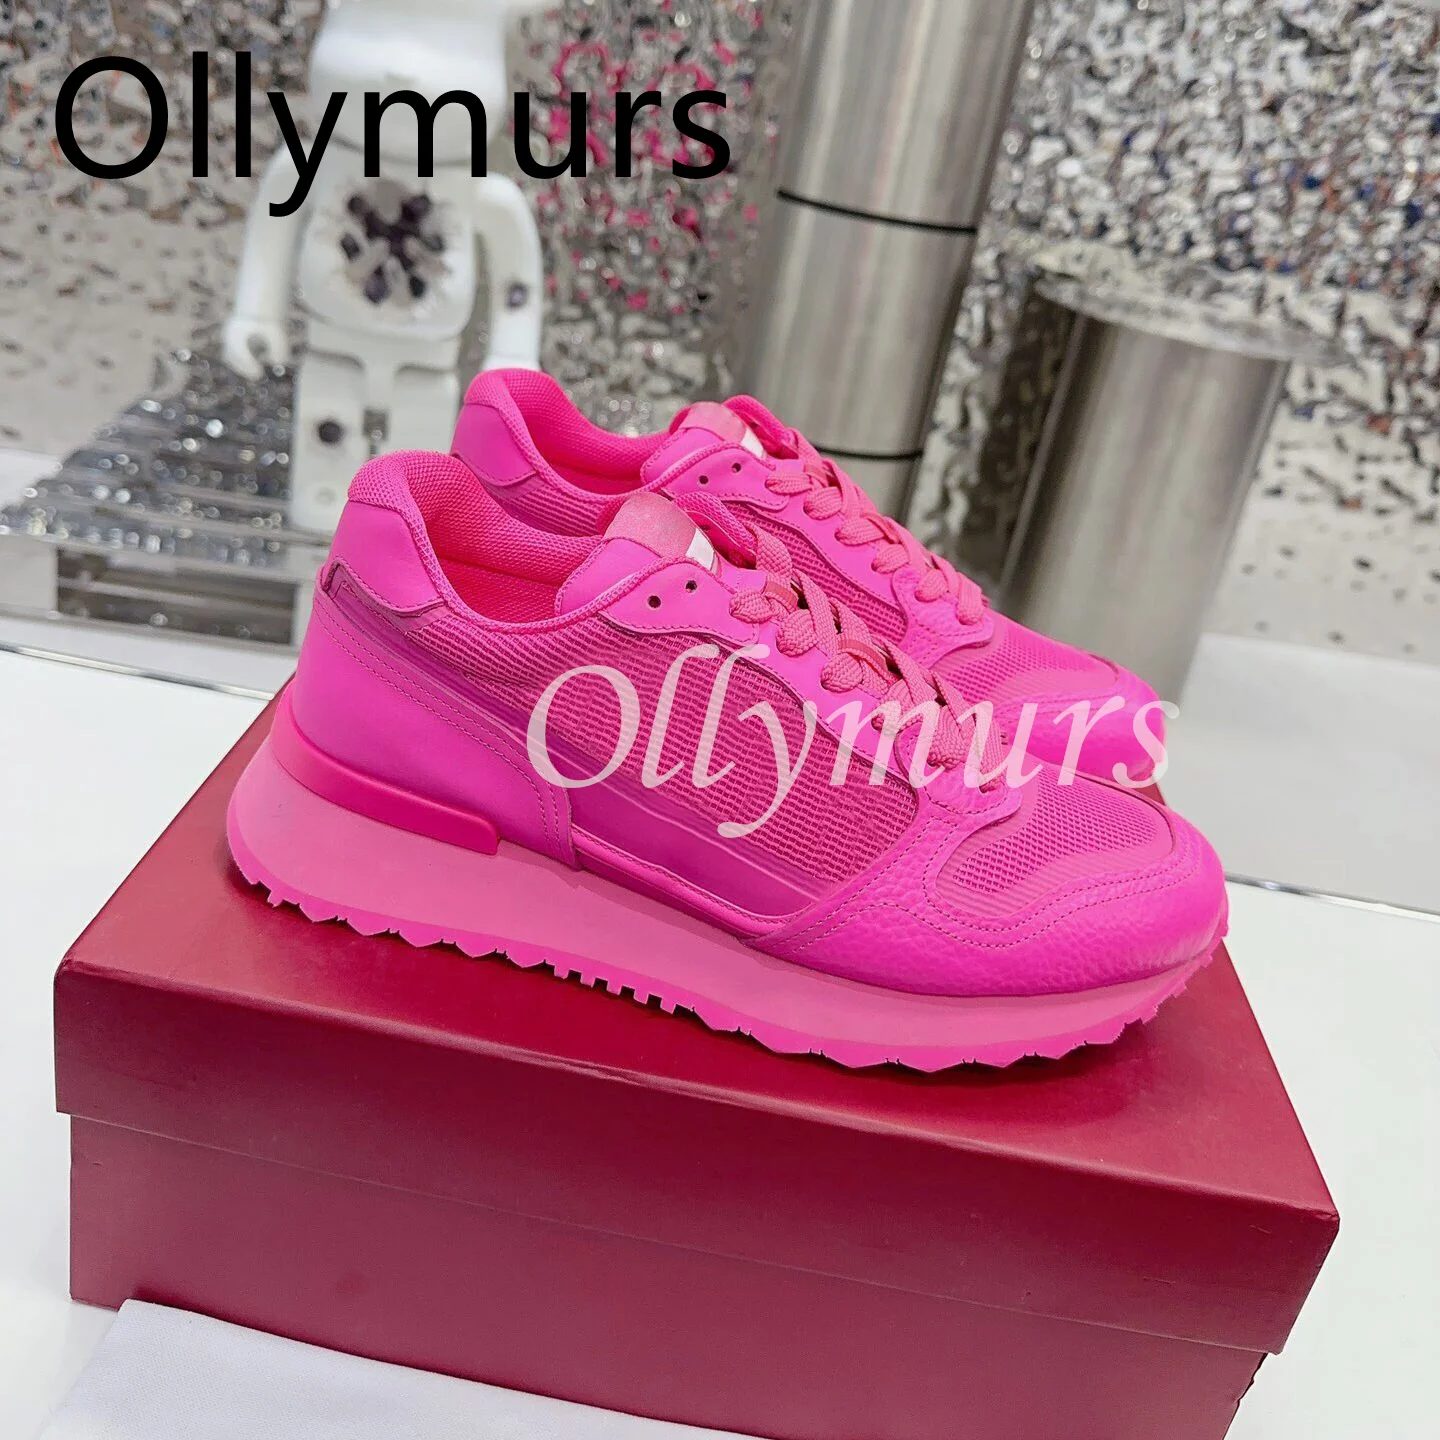 

New White Shoes Red Pink Color Brand Vulcanized Shoes Leather Platform Sneakers Studded Tenis Flats Autumn Design